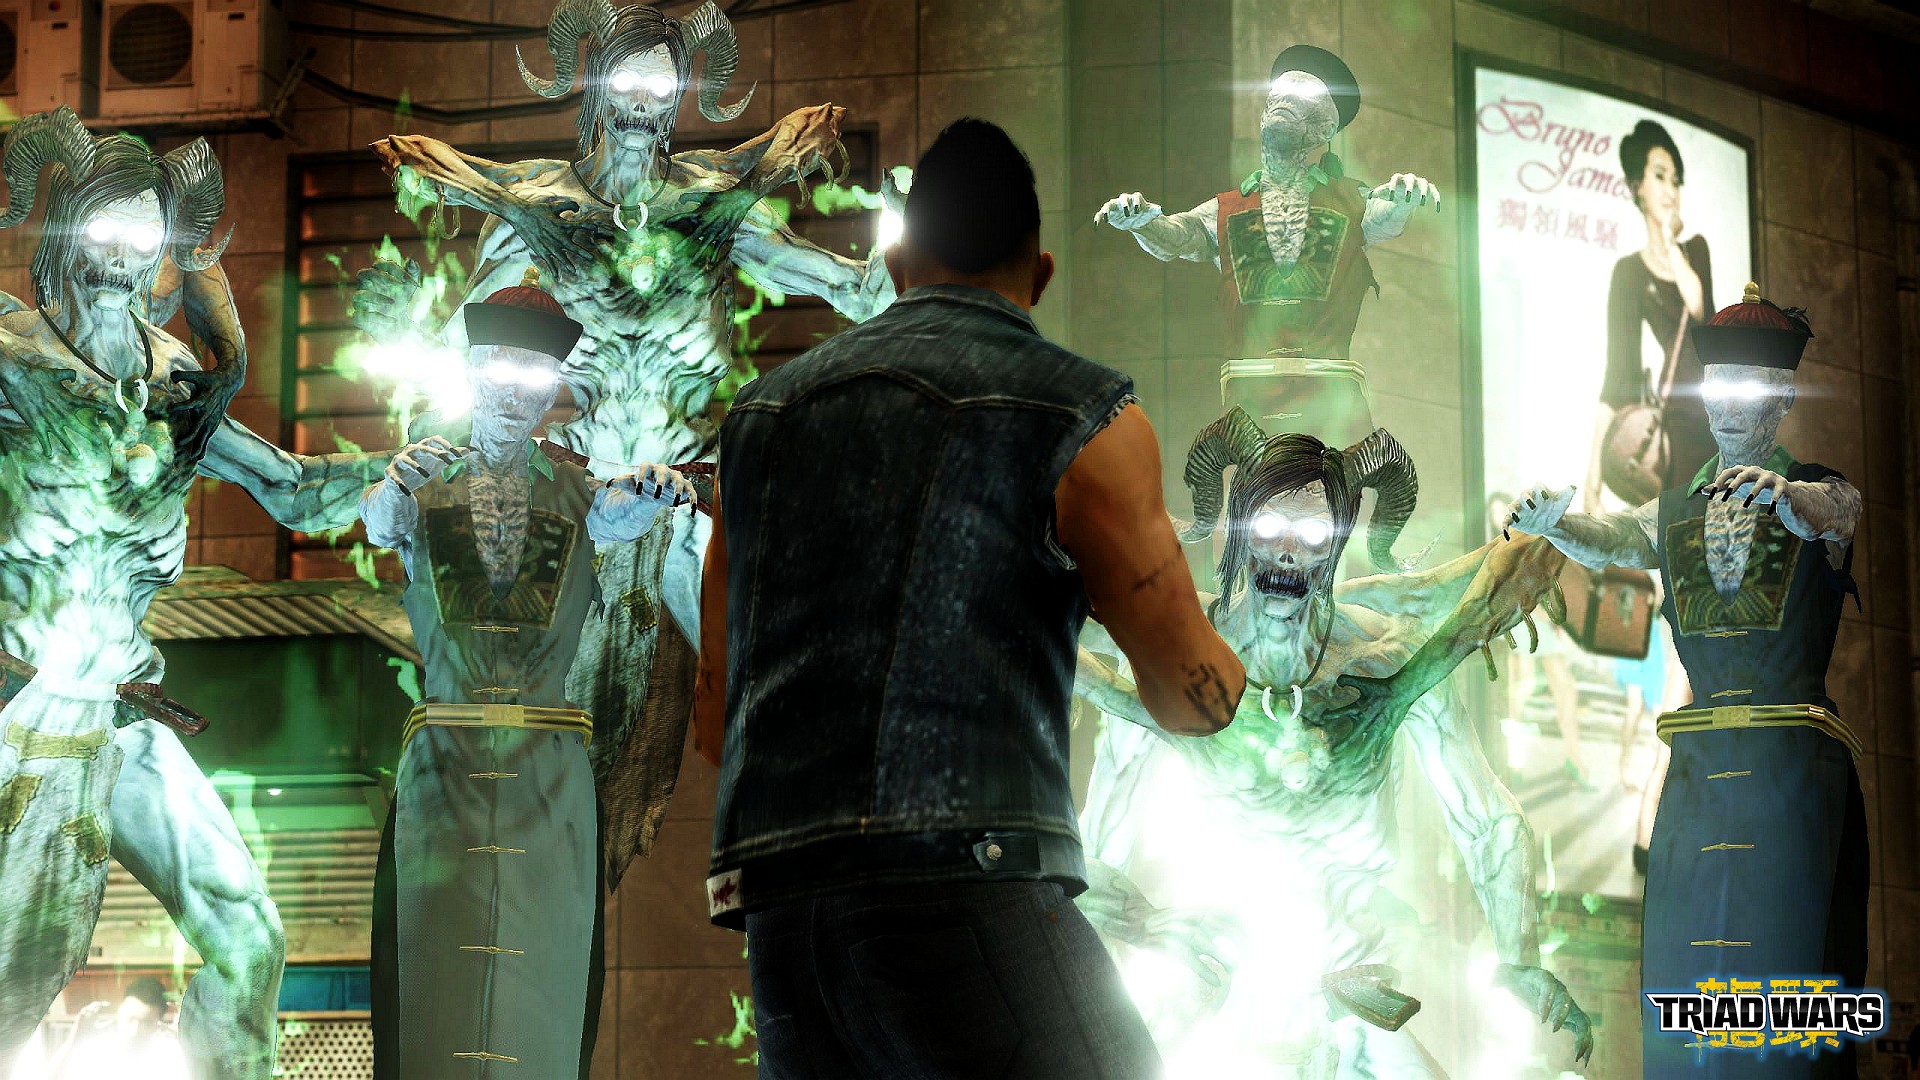 Triad Wars Interview: The Origin, Enforcers, and the Future